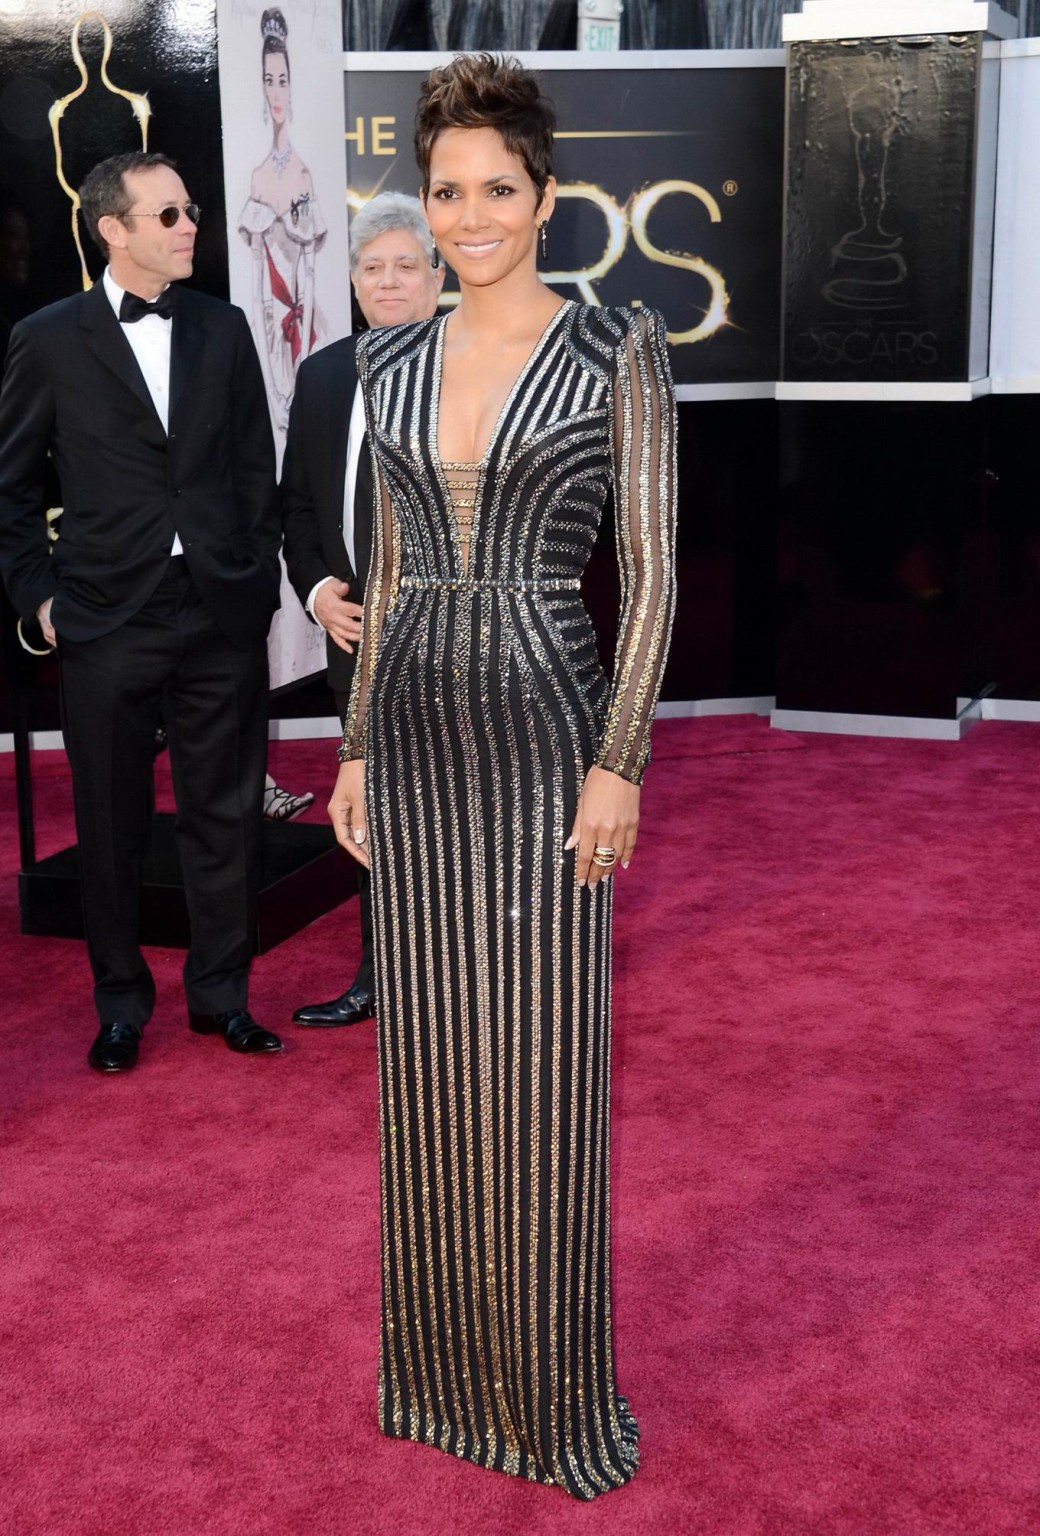 Busty Halle Berry showing cleavage at the 85th Oscars and Vanity Fair Oscar Part #75240724